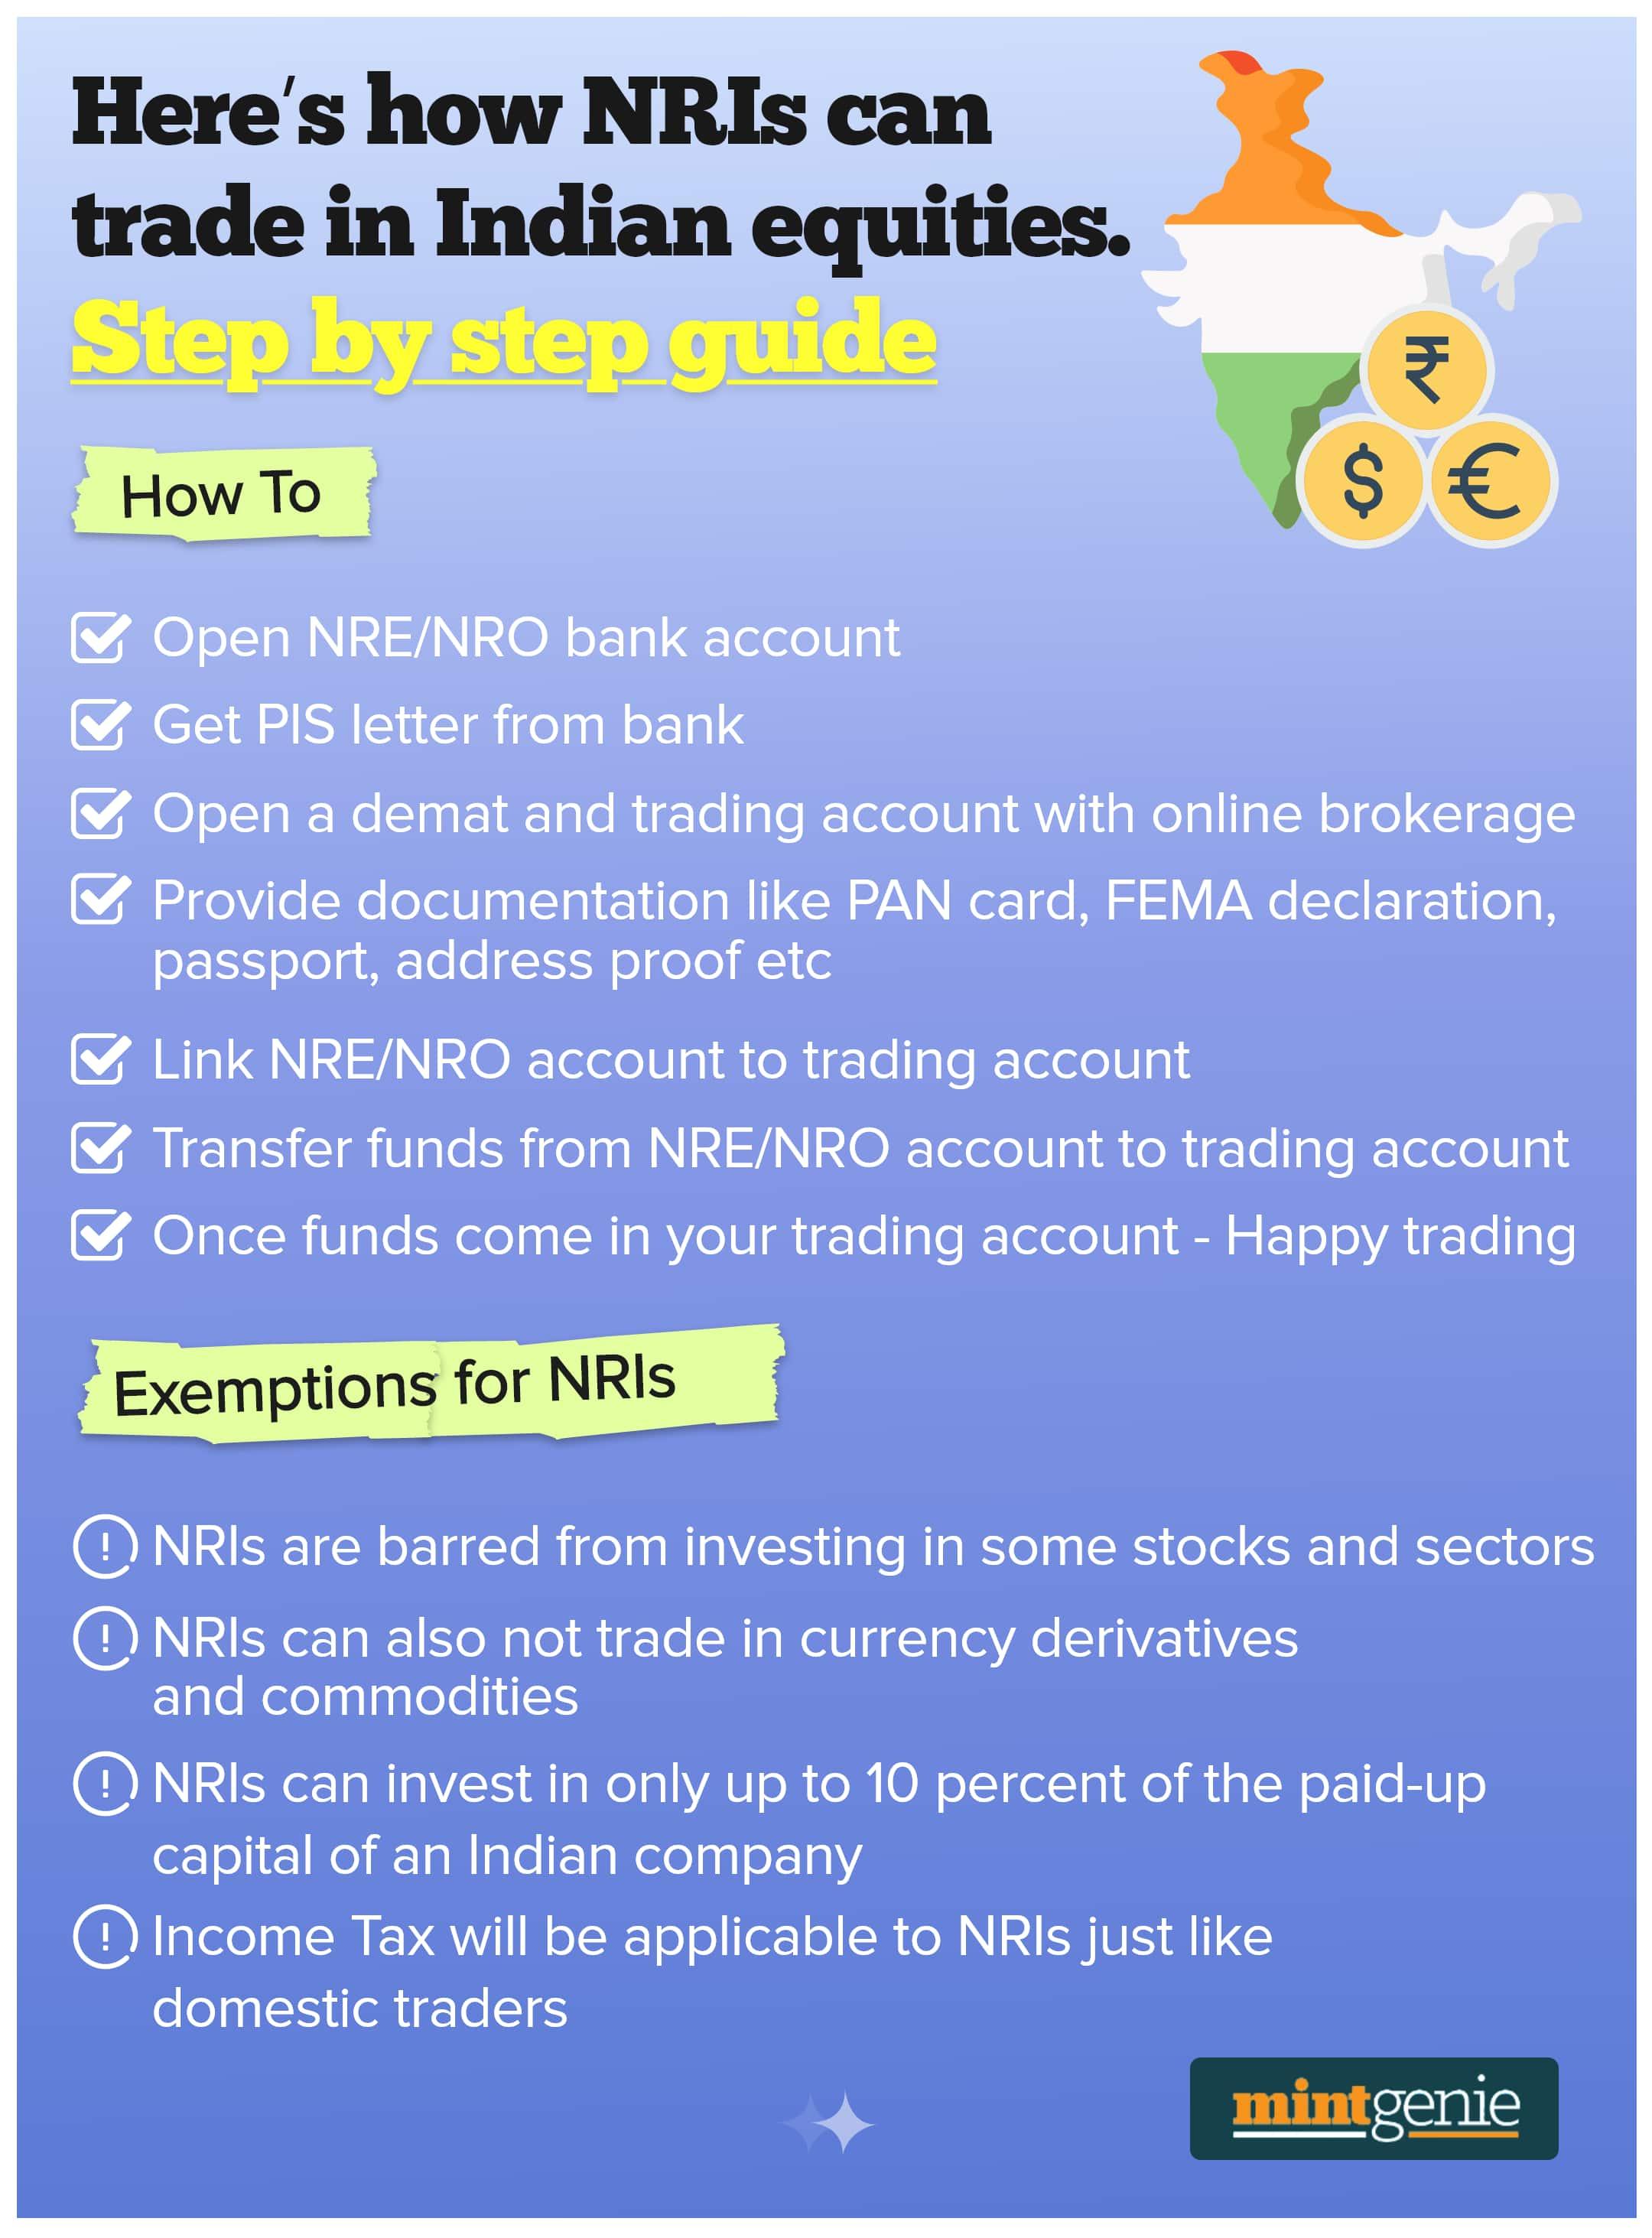 If you are an NRI and want to trade in the Indian stocks markets, here is a step by step guide to help you with that.